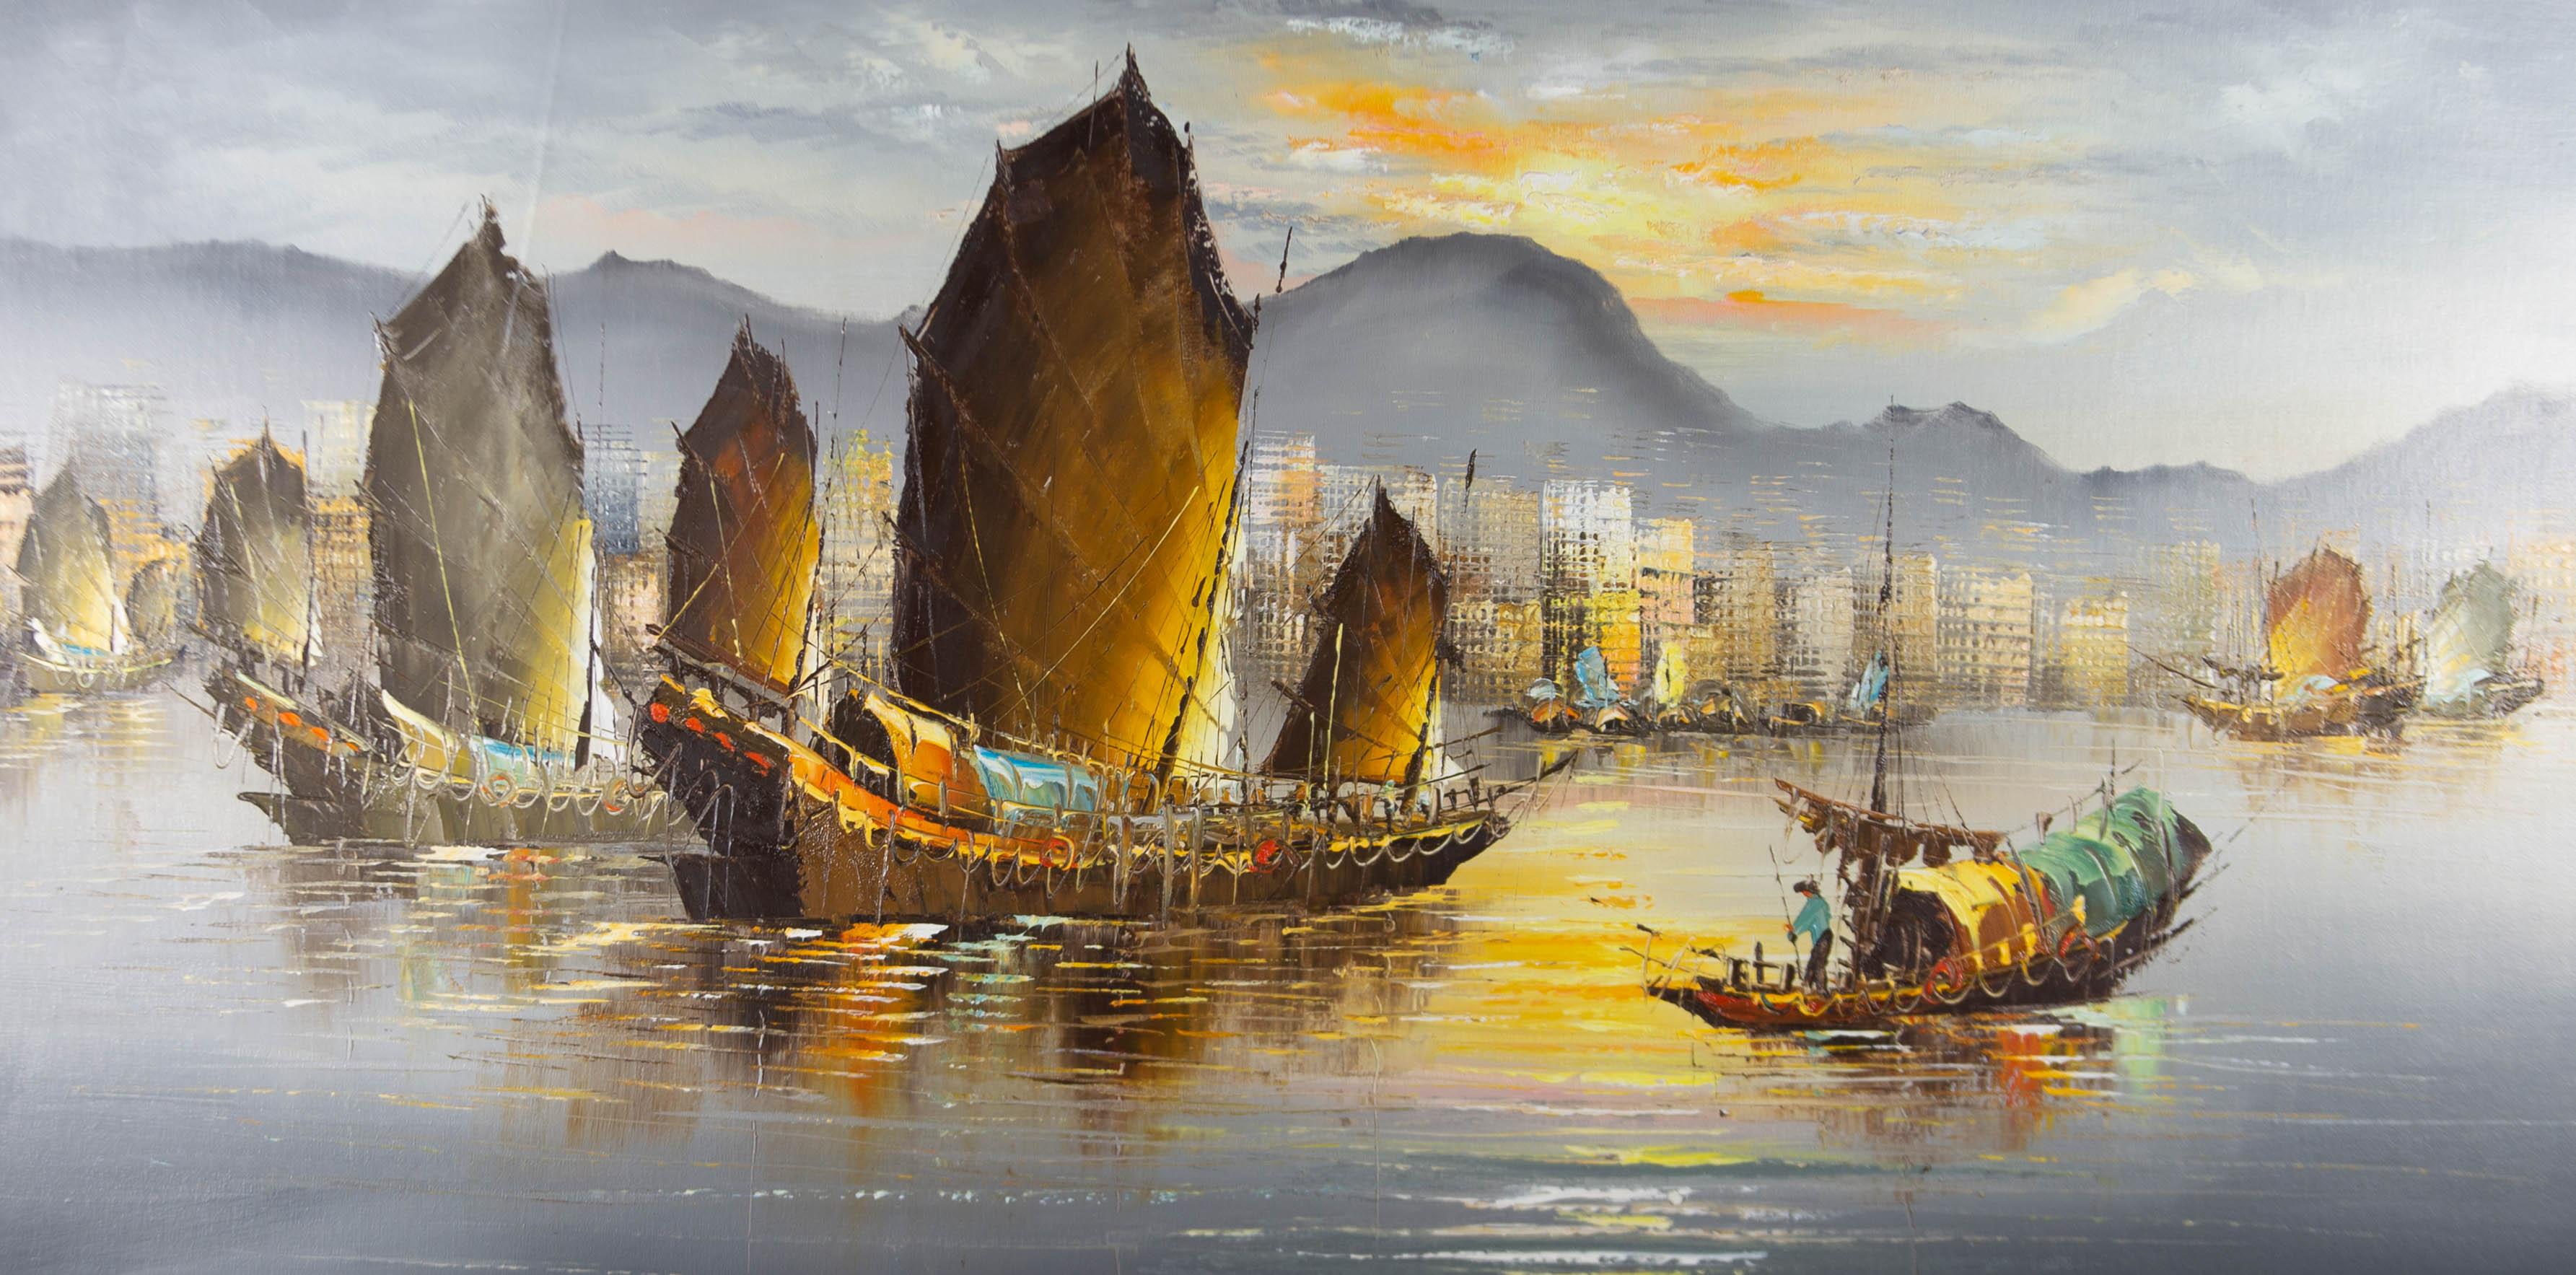 Contemporary Oil - Chinese Junk Boats - Painting by Unknown